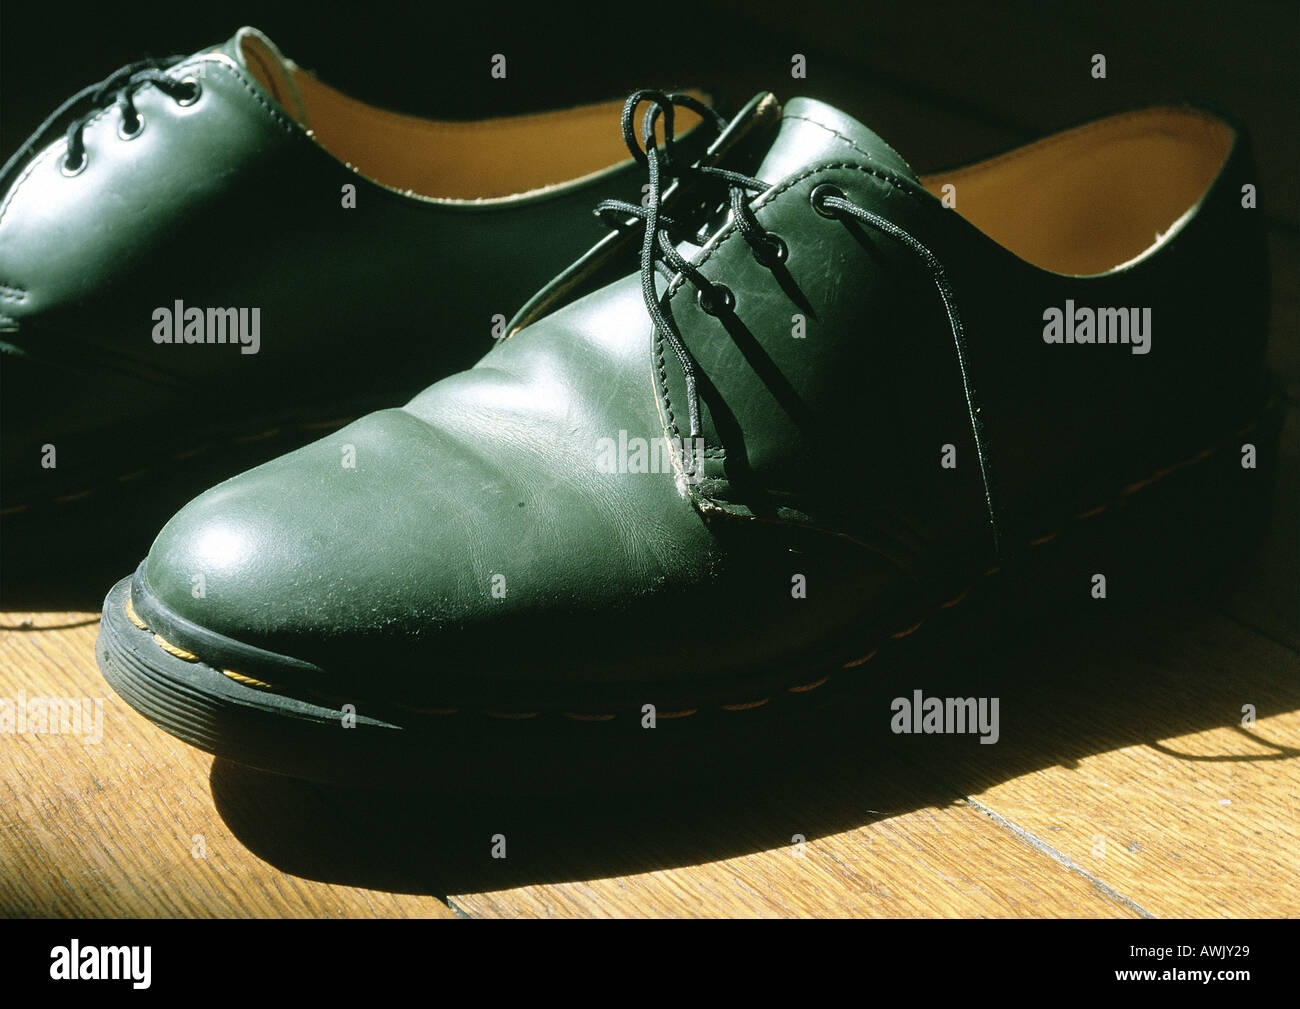 Pair of man's dress shoes. Stock Photo